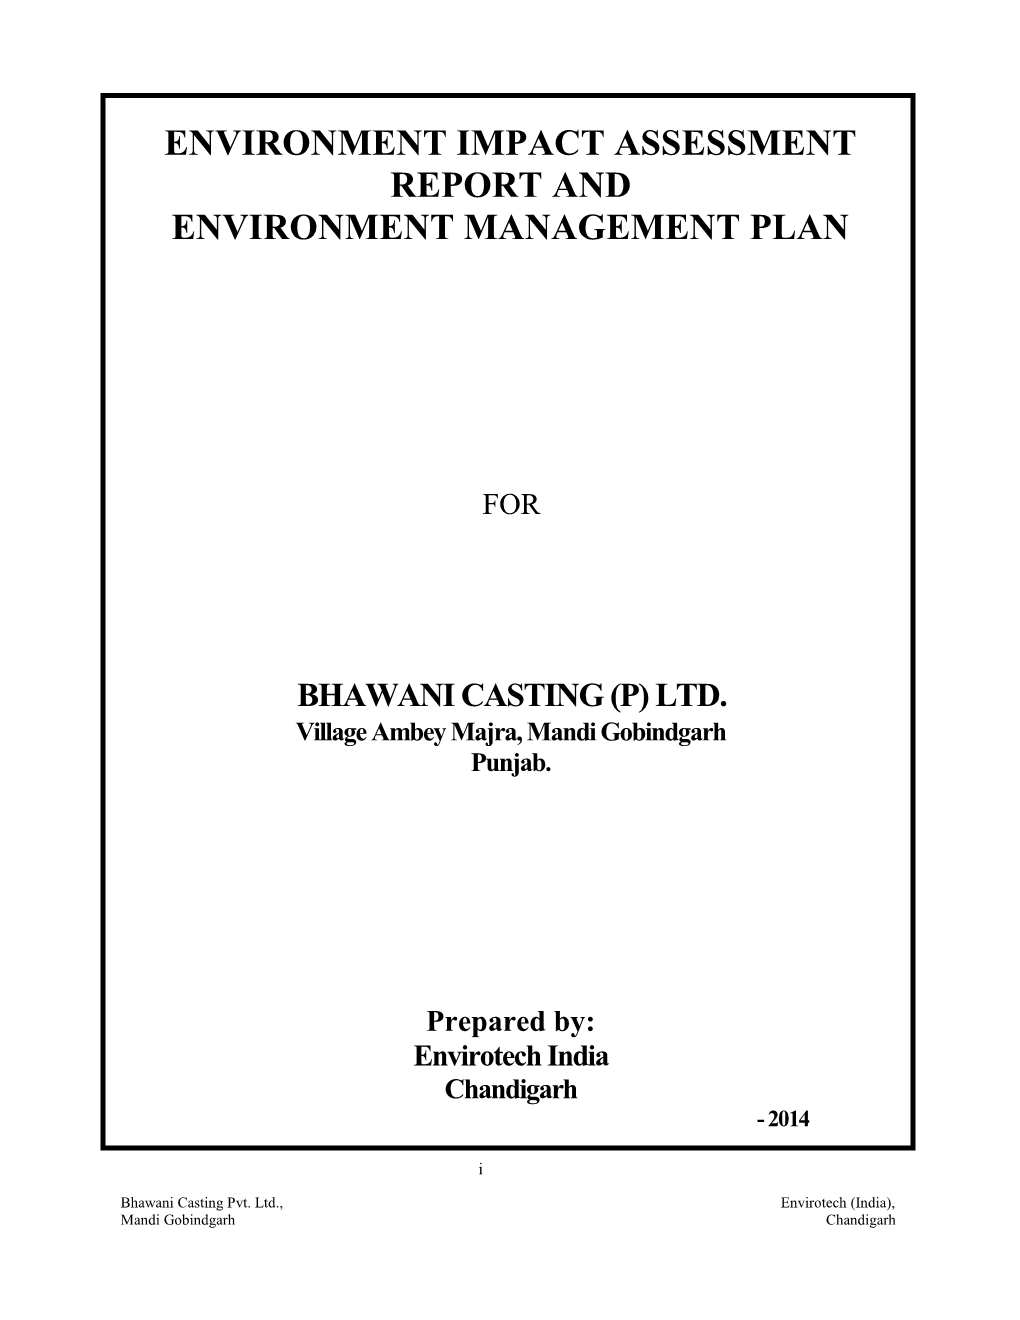 Environment Impact Assessment Report and Environment Management Plan